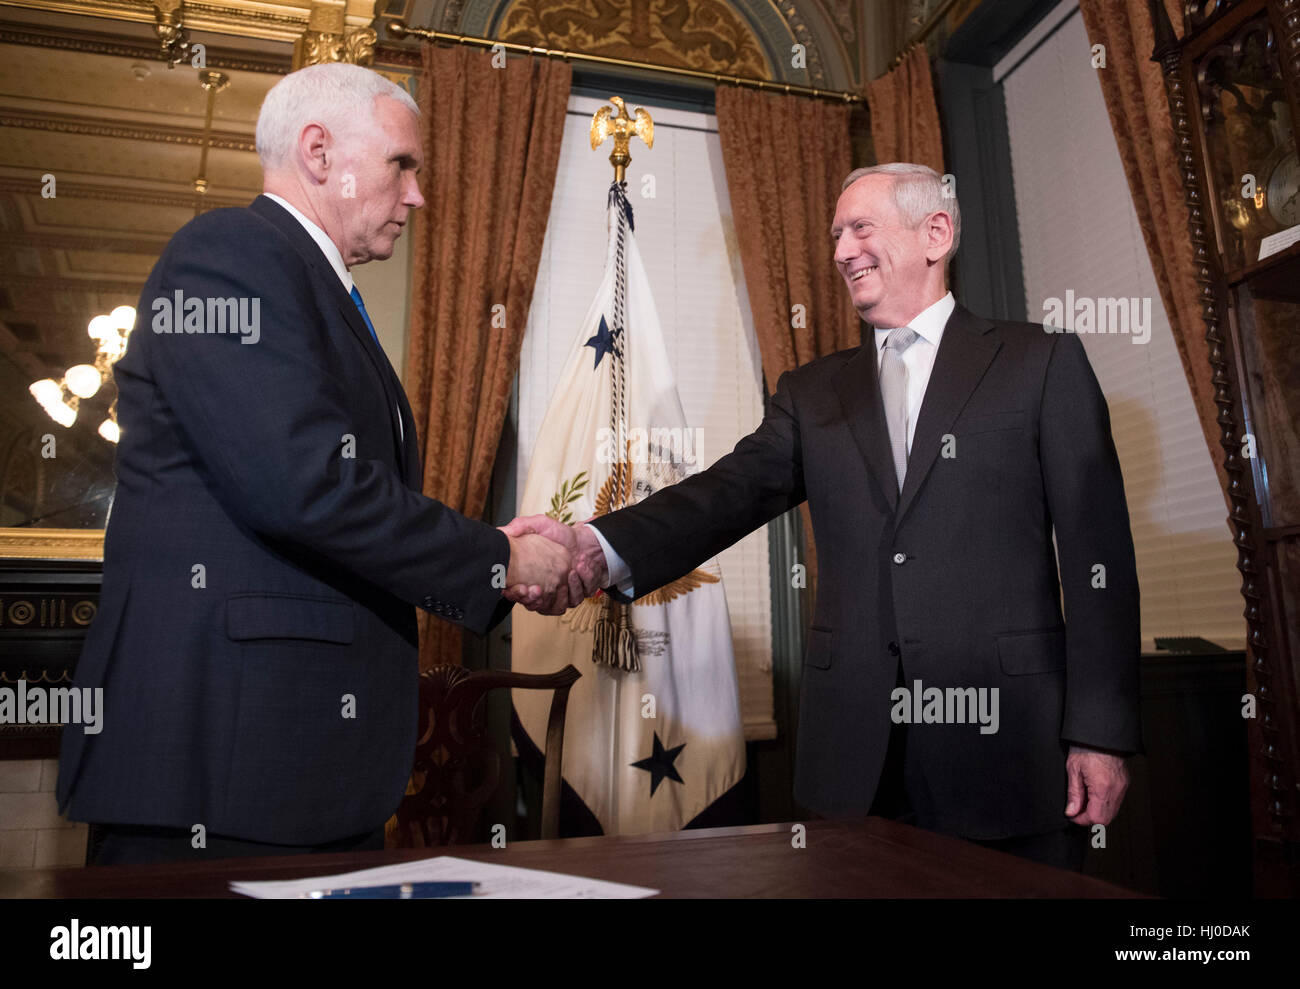 Washington, USA. 20th January, 2017. Marine Corps General James Mattis shakes hands with Vice President Mike Pence after being sworn-in as Defense Secretary, in the Vice Presidential ceremonial office in the Executive Office Building in Washington, DC on January 20, 2017. Photo by Kevin Dietsch/UPI /CNP/MediaPunch Credit: MediaPunch Inc/Alamy Live News Stock Photo